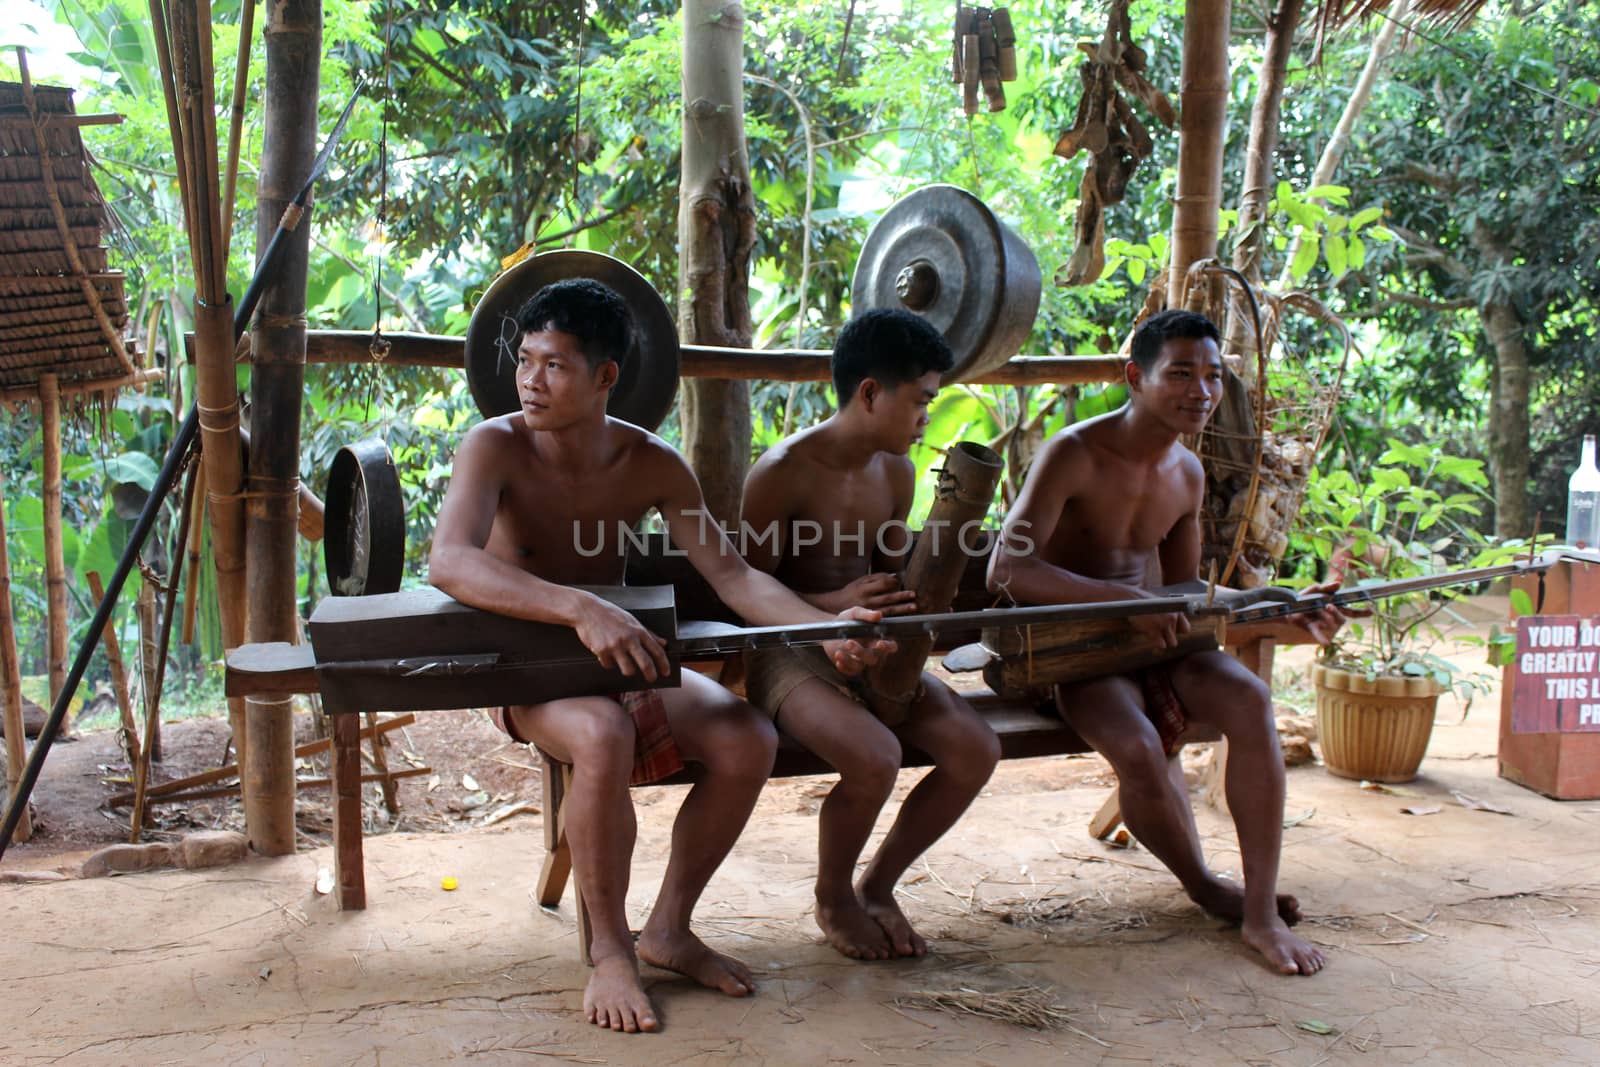 PALAWAN, PH - DEC. 4: Palawan Butterfly Ecological Garden and Tribal Village tribe on December 4, 2016 in Puerto Princesa, Palawan, Philippines.